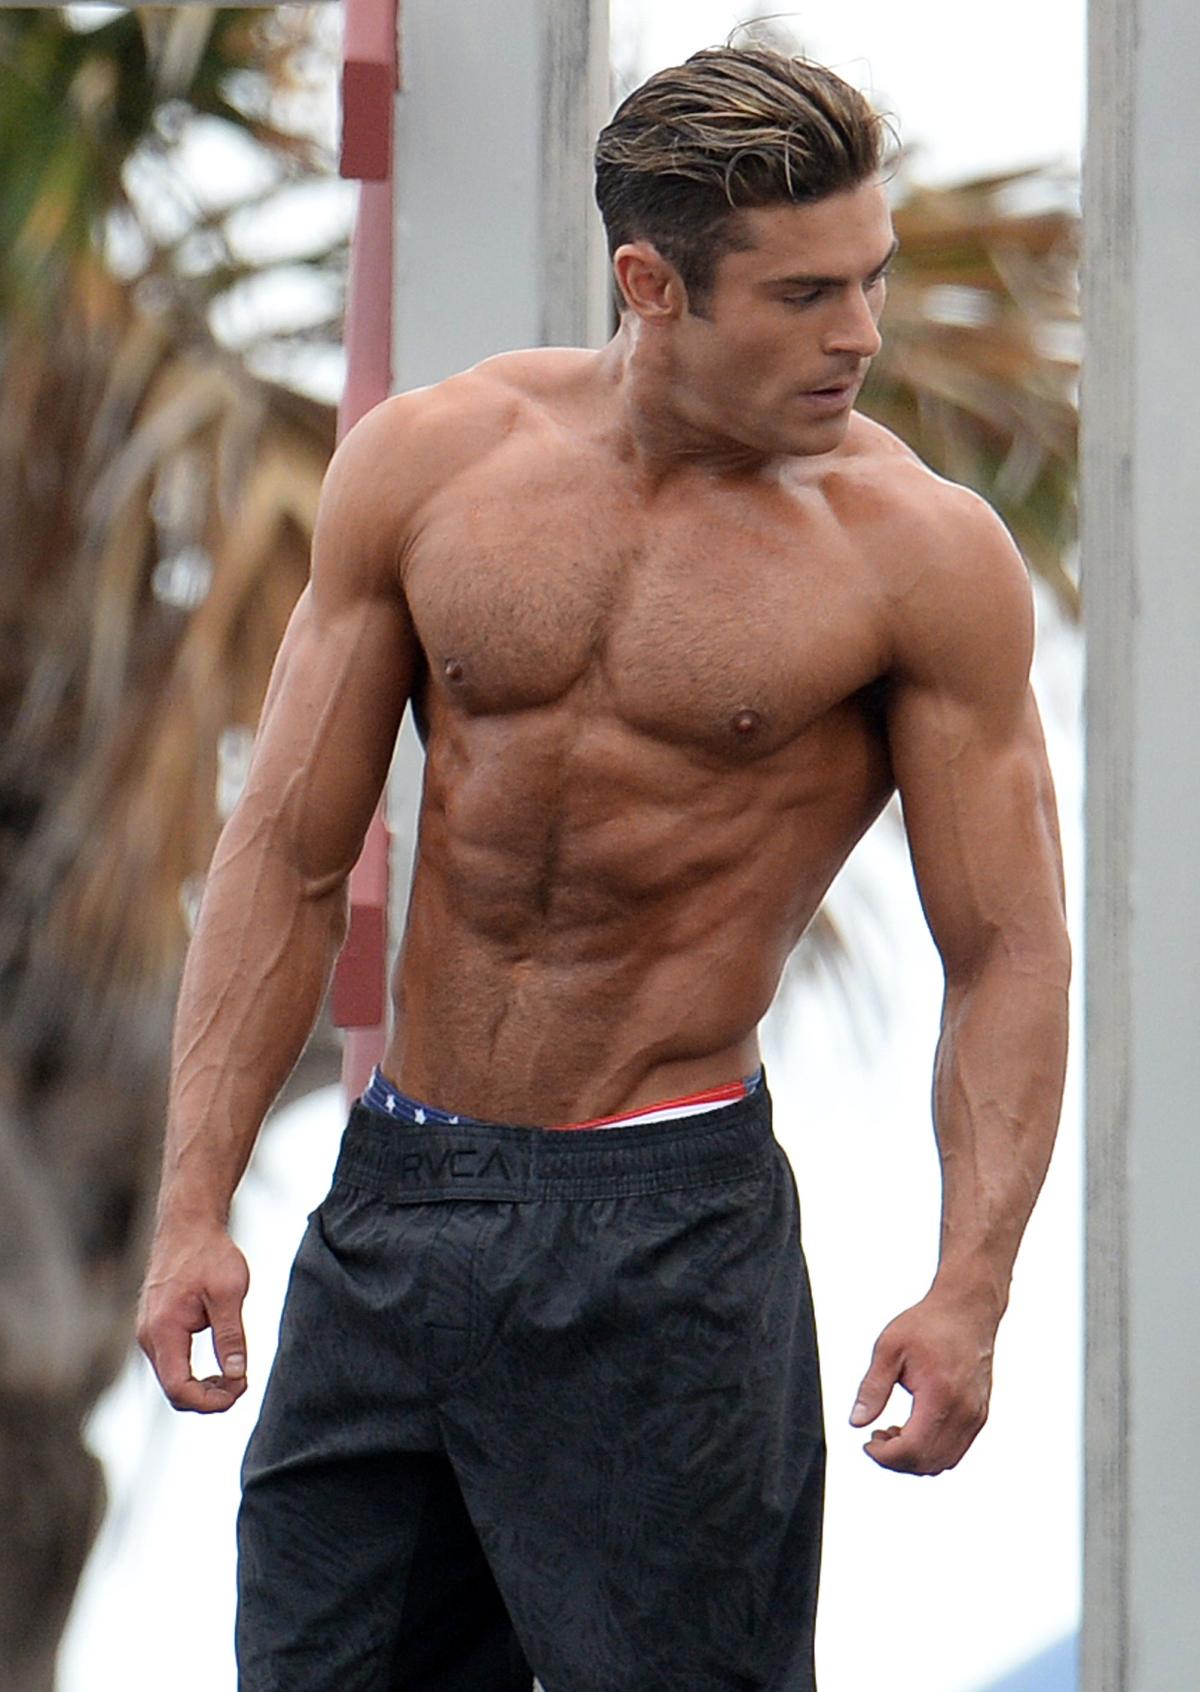 Shirtless Hunks Hot Celebs And Their Insane Physiques Zac Efron ?w=1200&quality=74&strip=all